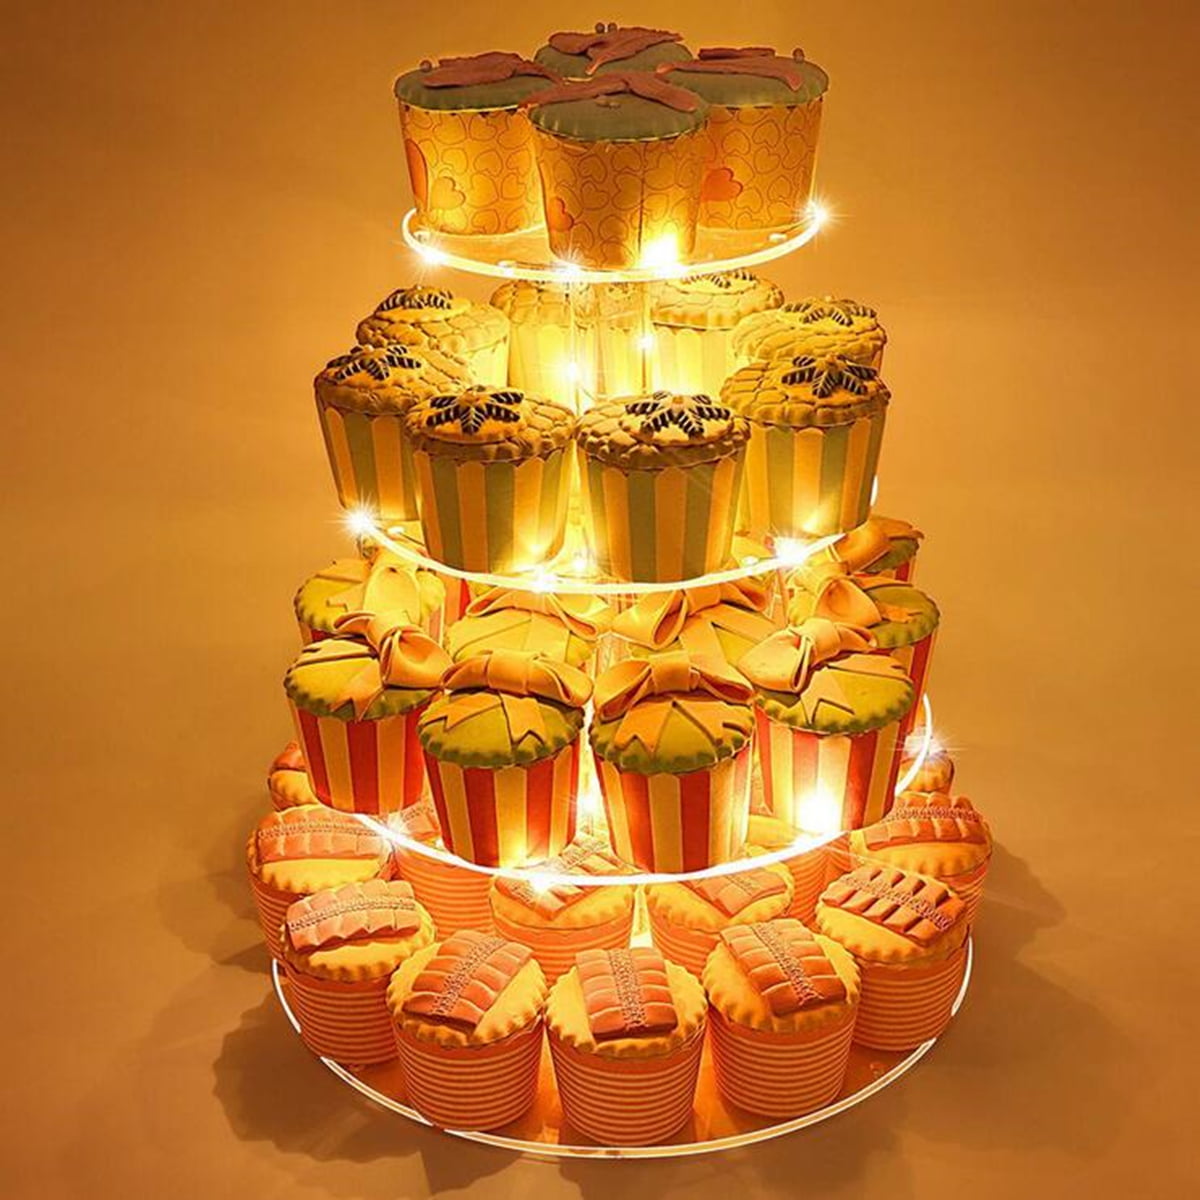 4-Tiers Cupcake Stand LED Tower Display Tree Acrylic Cake Holder Wedding Party 